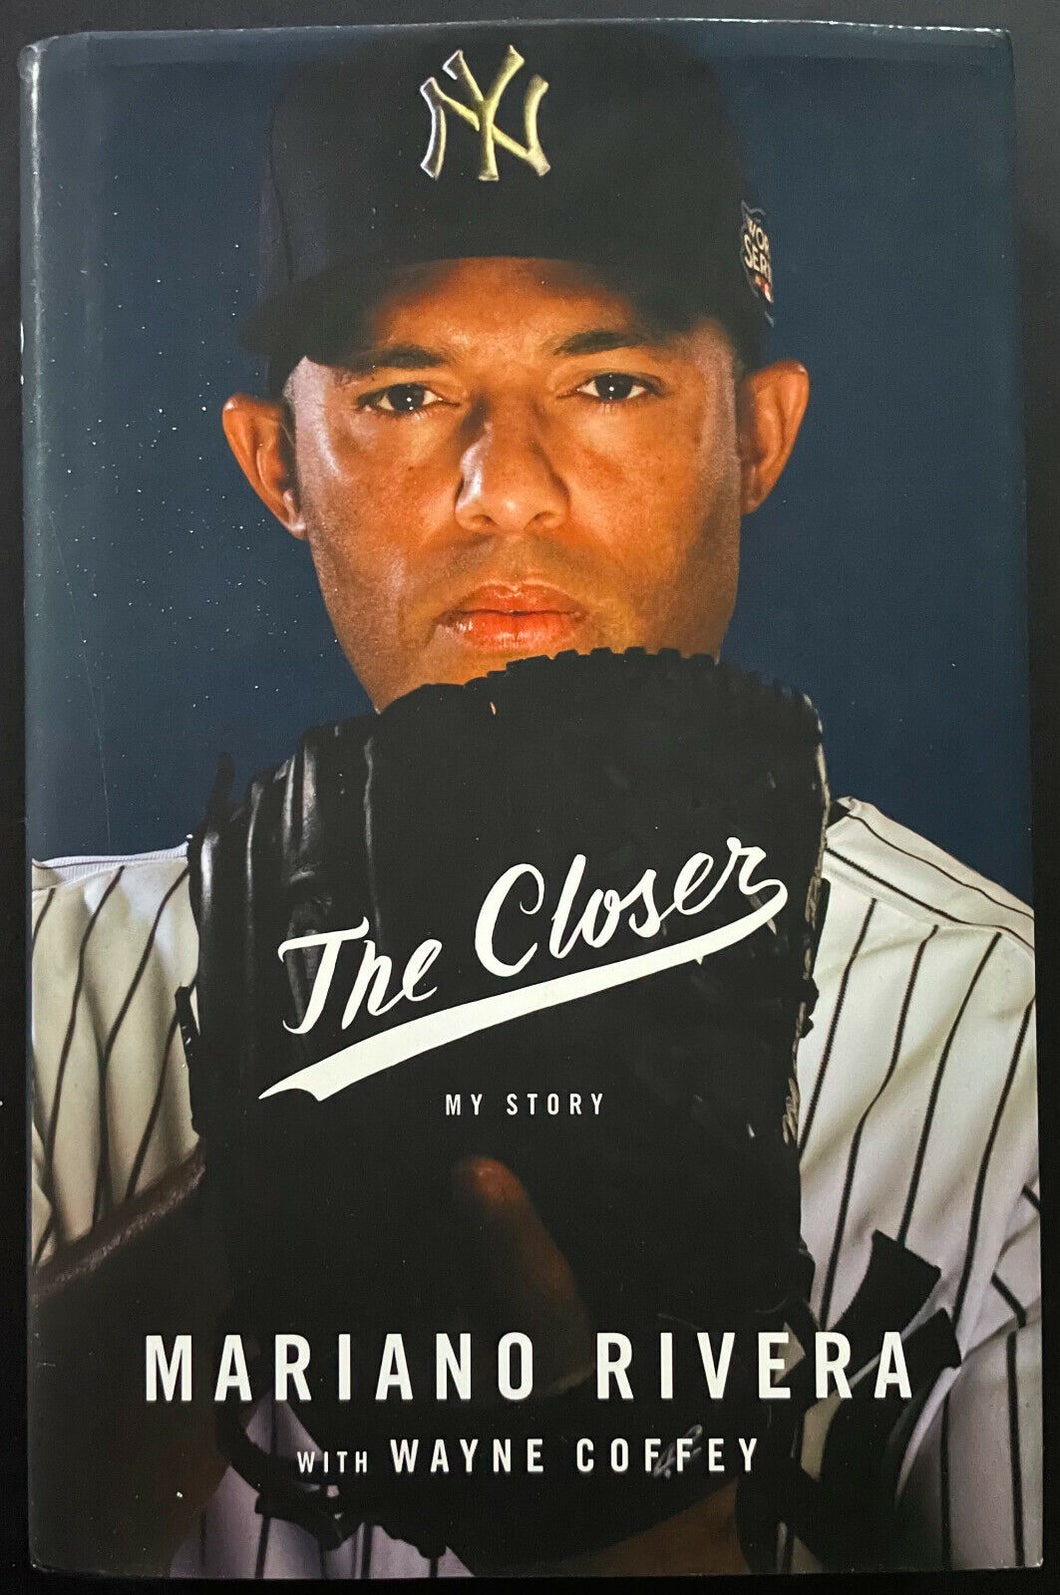 Mariano Rivera Signed The Closer Autobiography Book Autographed MLB Steiner